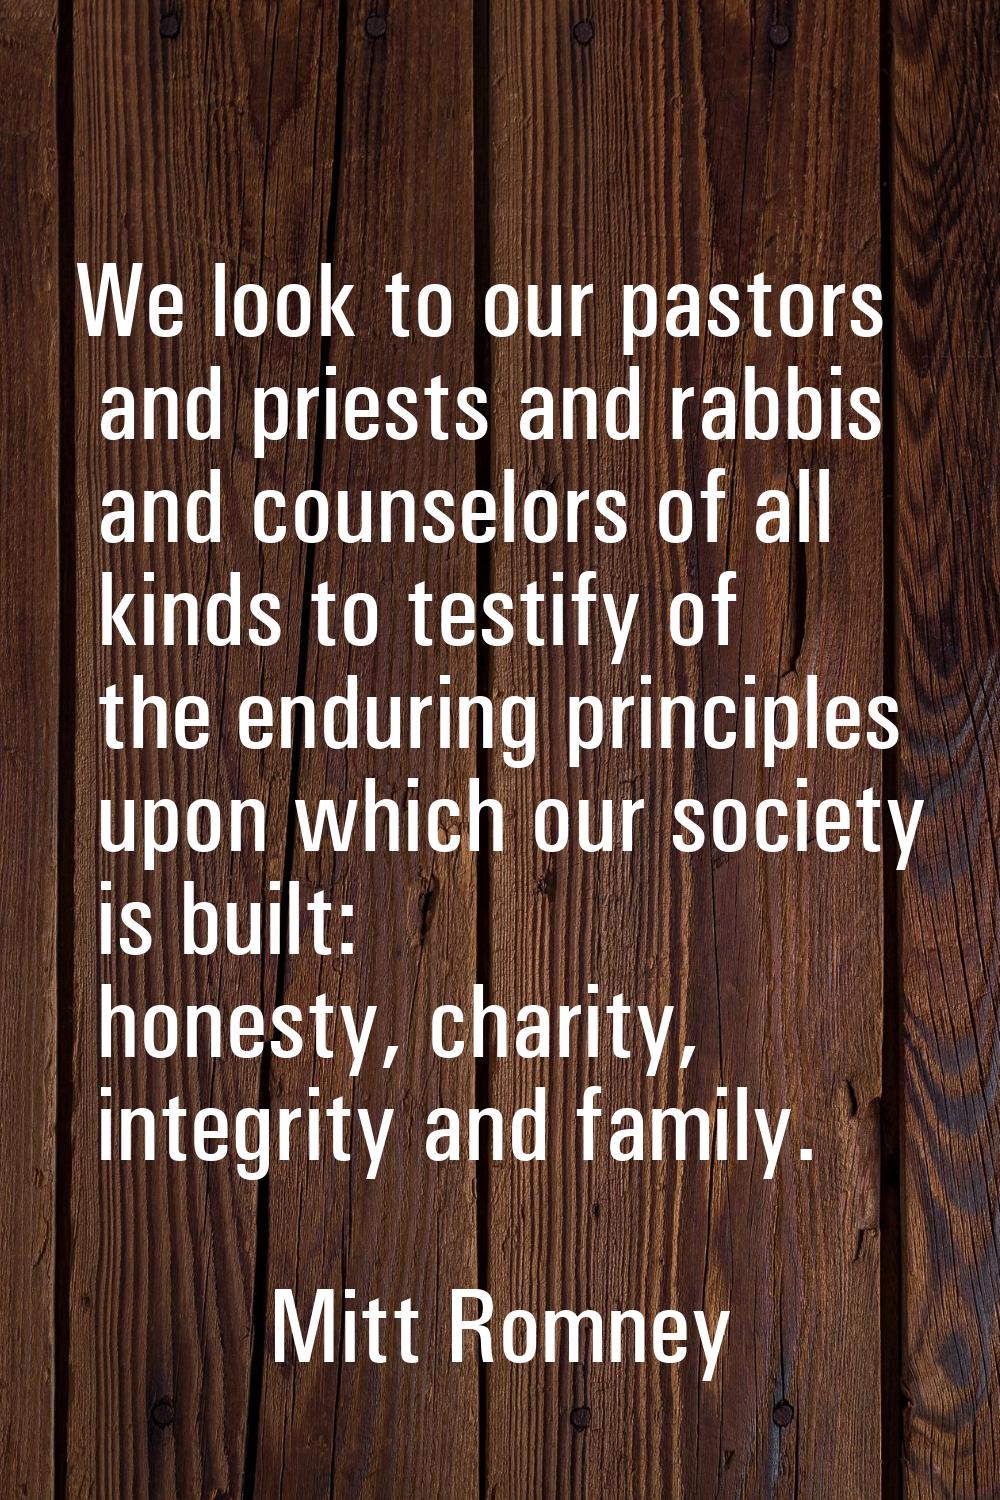 We look to our pastors and priests and rabbis and counselors of all kinds to testify of the endurin